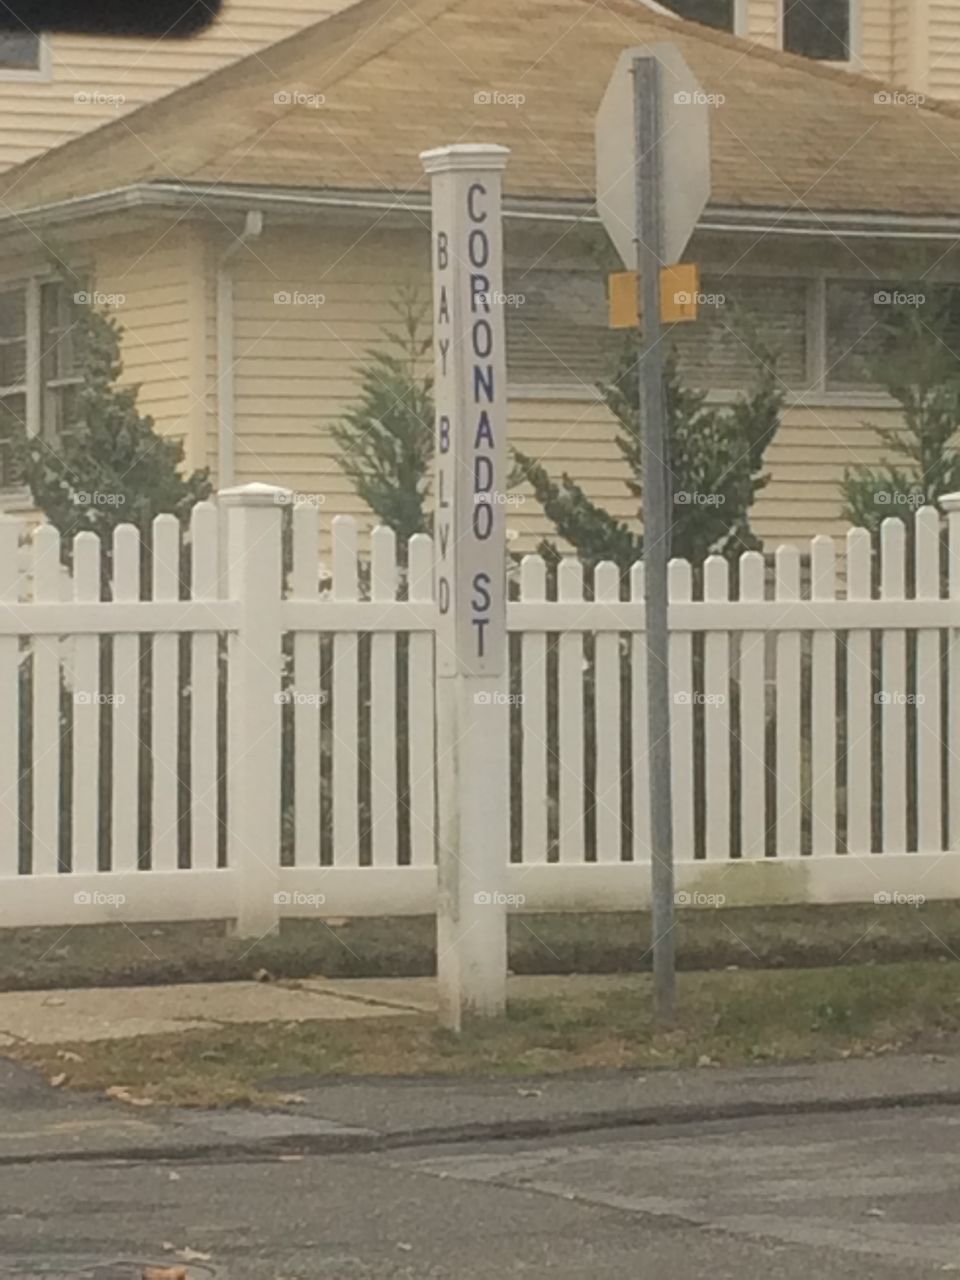 Not just a Street sign for me 